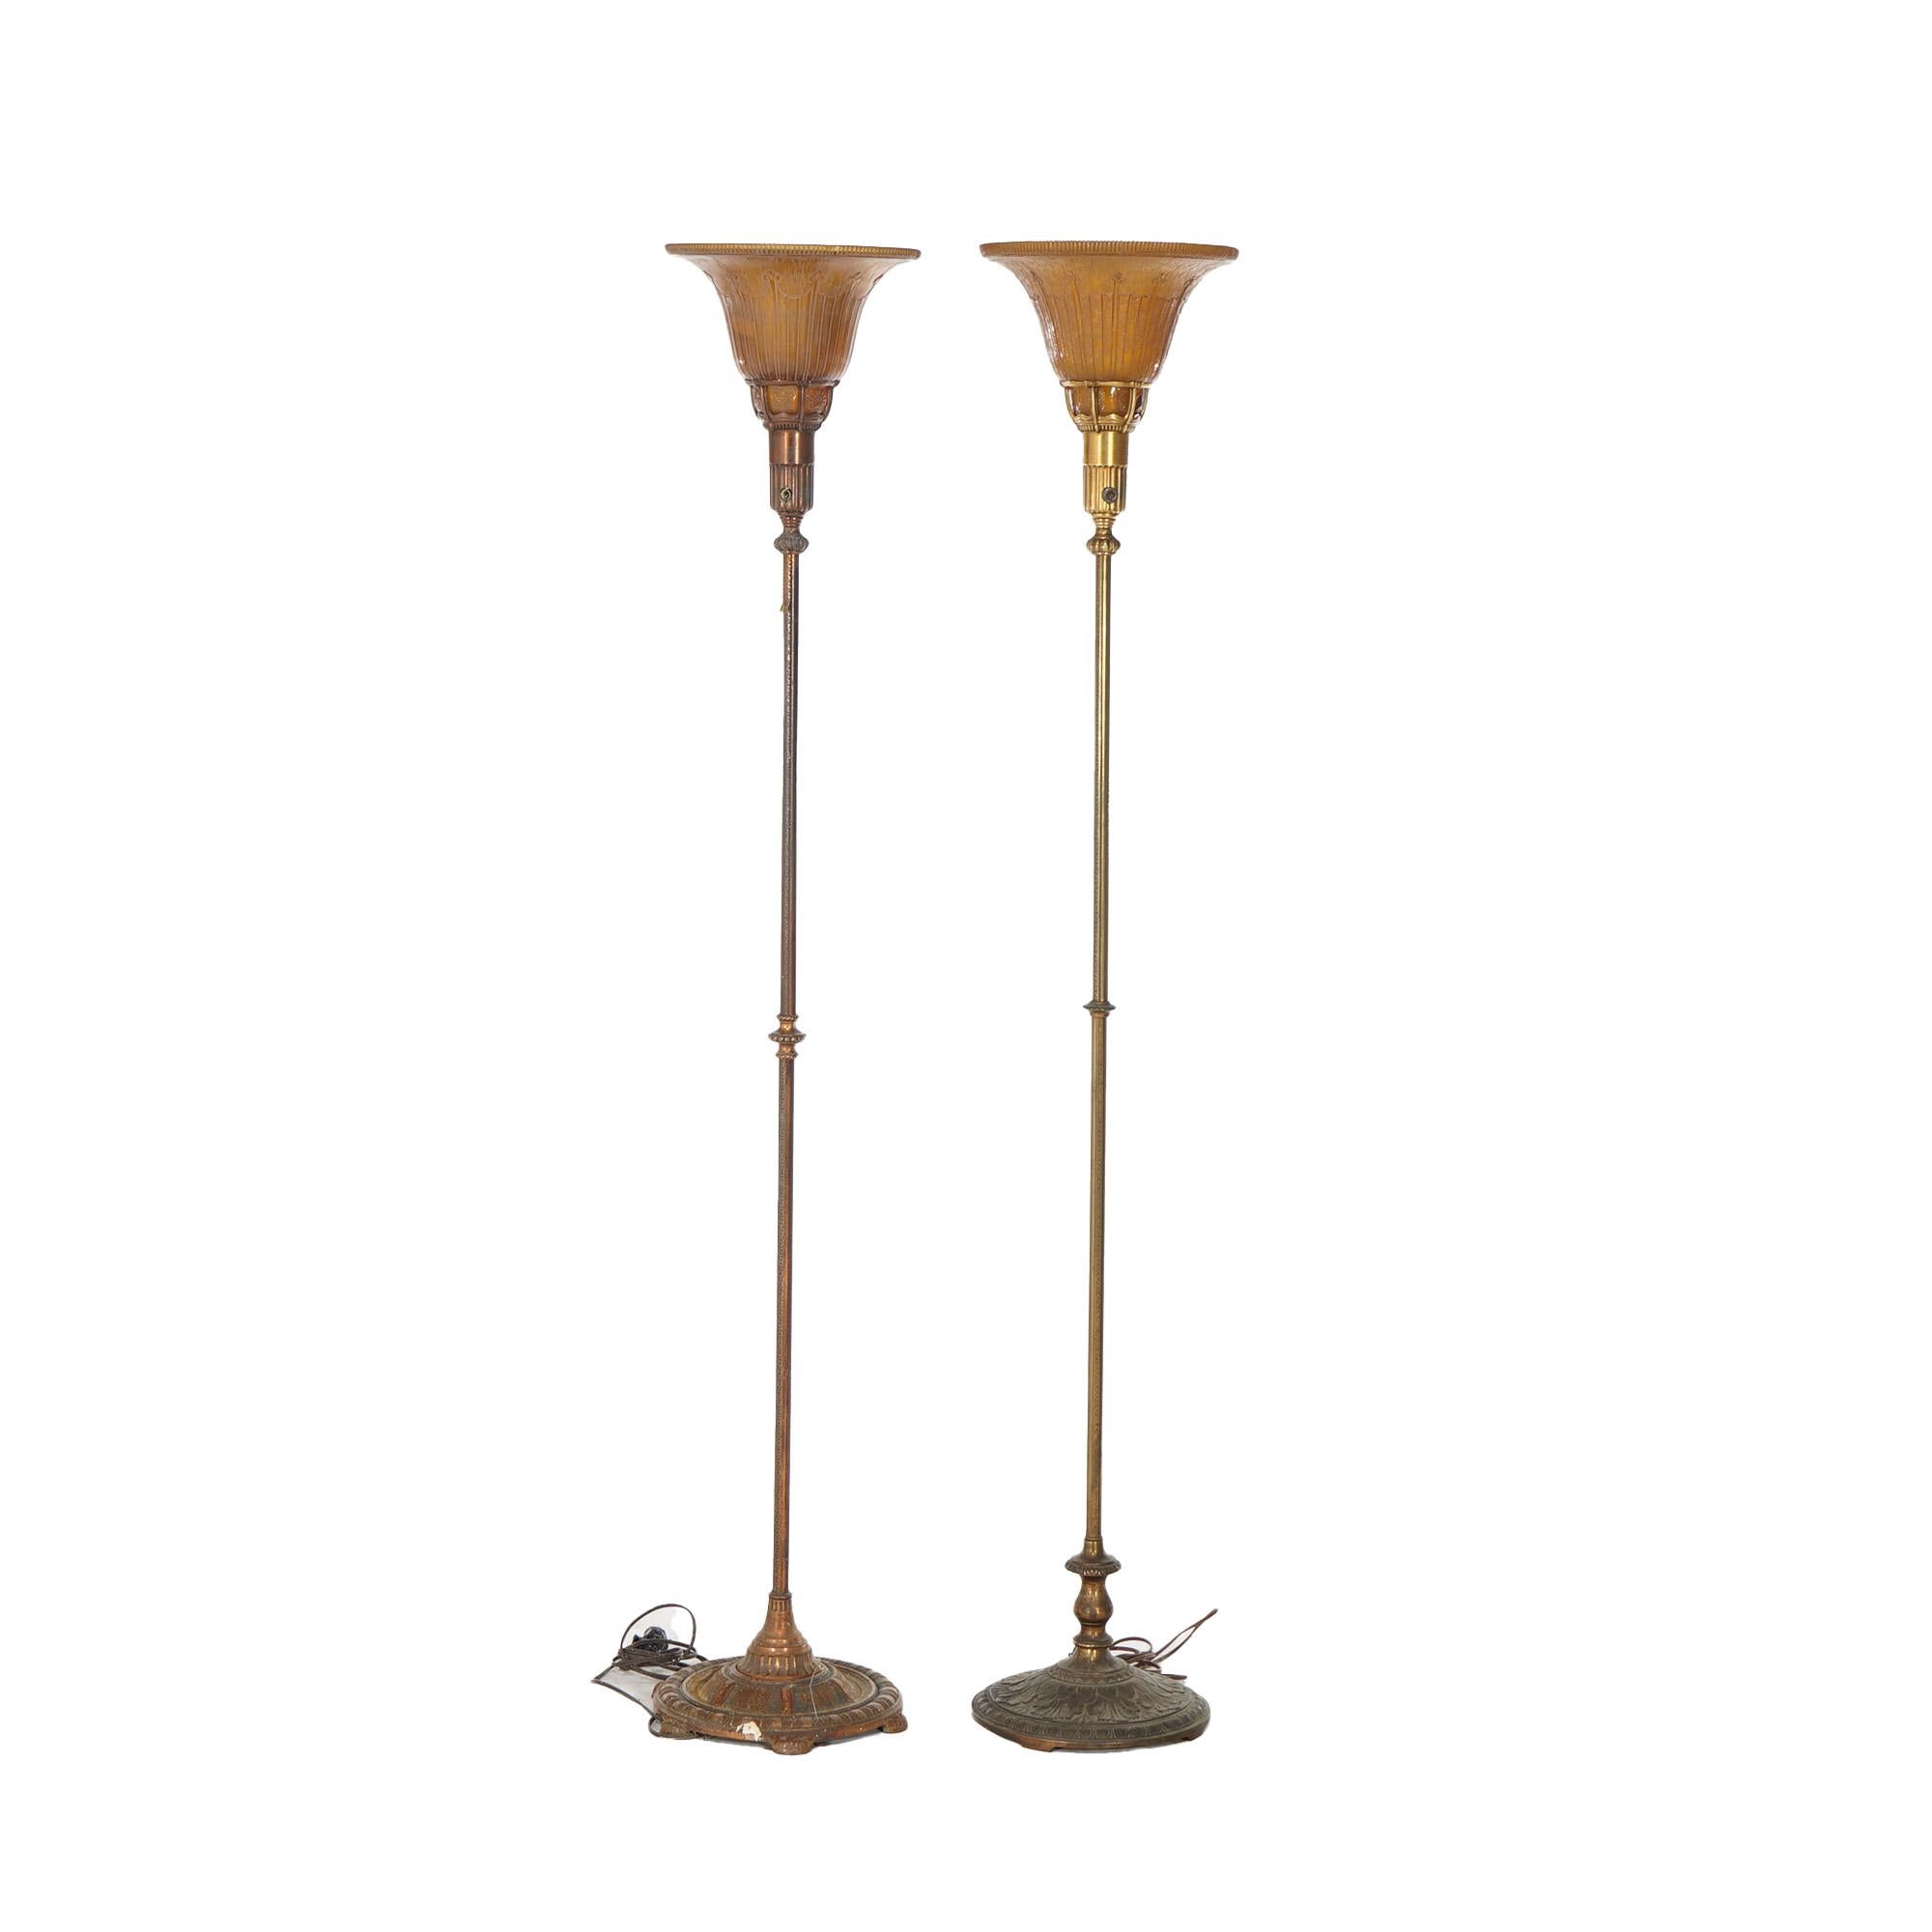 Two Classical style torchiere floor lamps by Lightolier offer gilt metal bases with amber glass shades, 20th century

Measures - 66.25